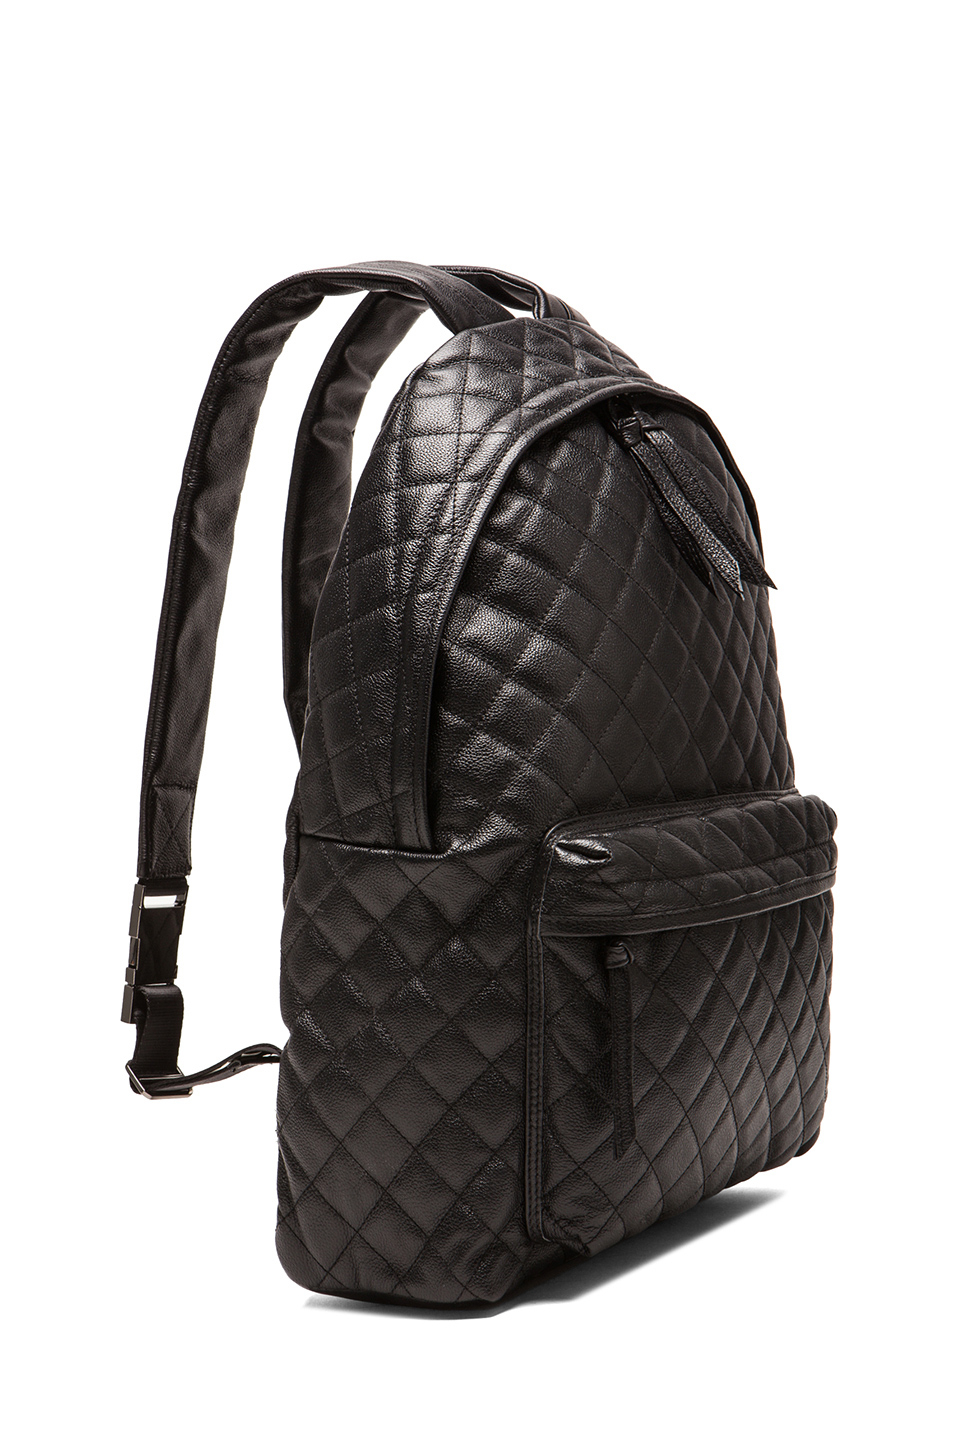 Lyst - Stampd Mens Quilted Leather Backpack in Black